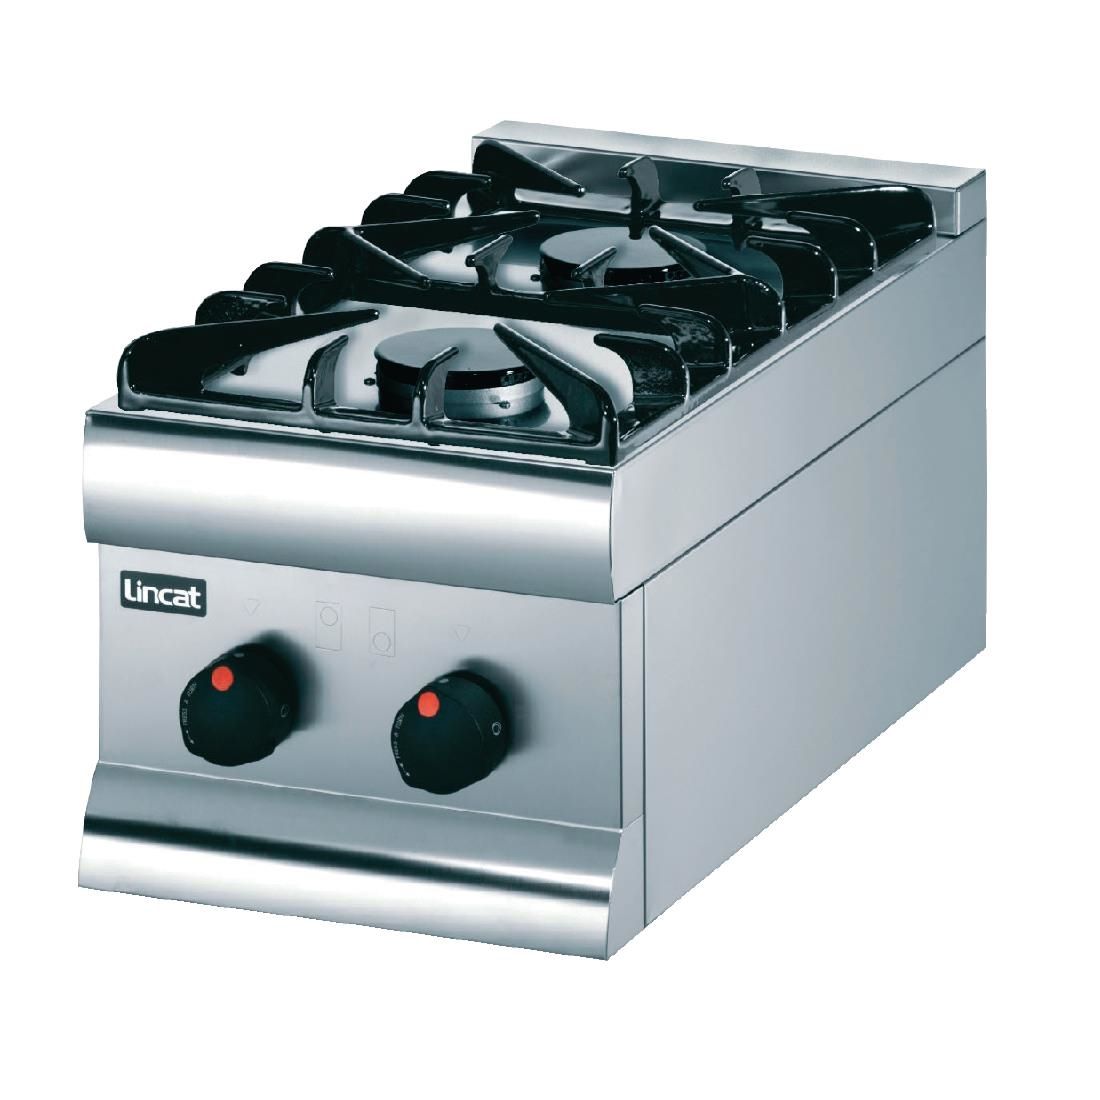 HT3/N/P - Lincat Silverlink 600 Gas Counter-top Boiling Top - 2 Burners - W 300 mm - 9.0 kW E416 JD Catering Equipment Solutions Ltd